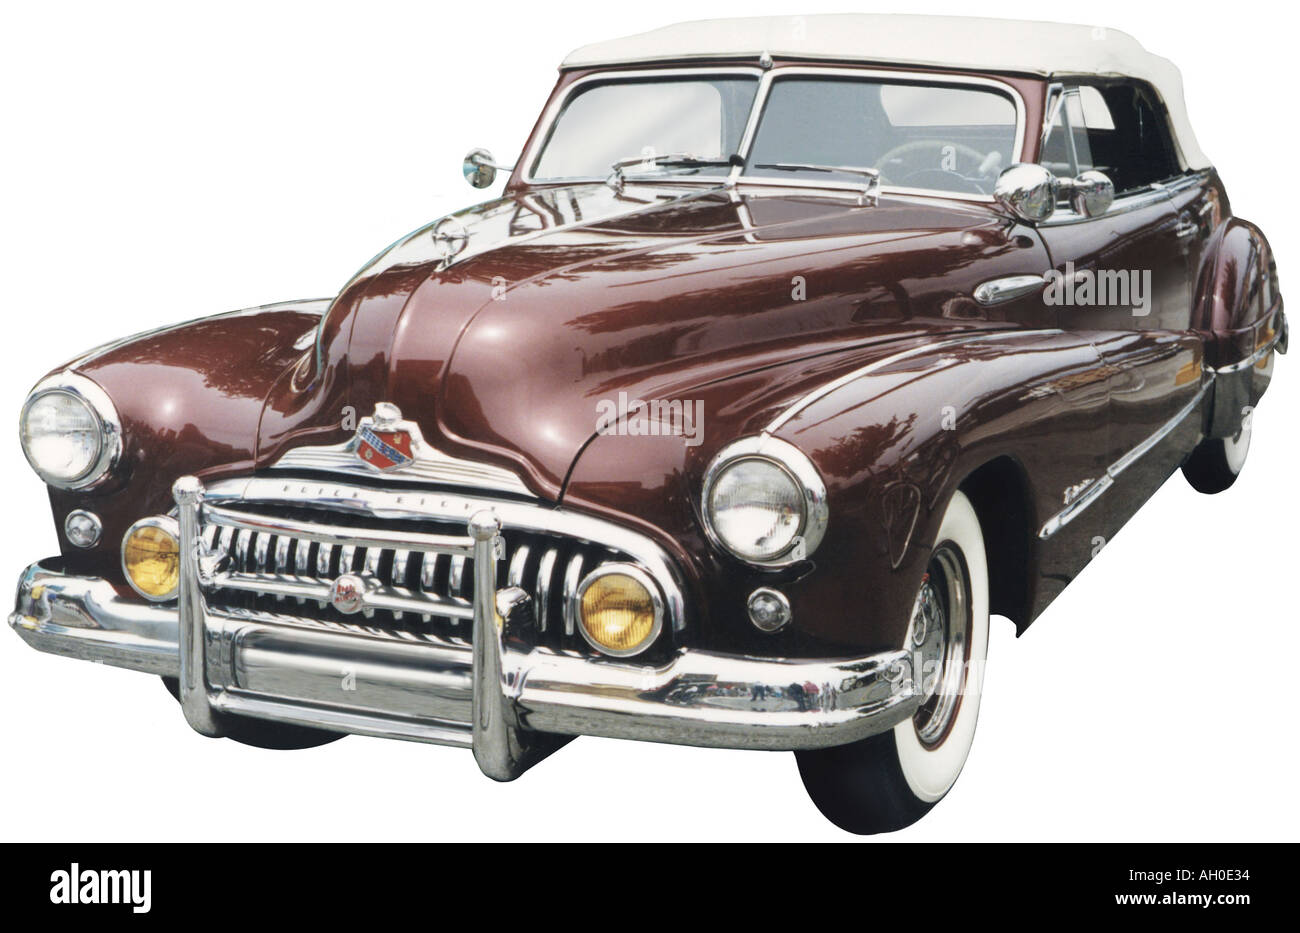 Cutout image of the front end of a maroon colored 1948 Buick Super convertible with chrome grill and yellow fog lights Stock Photo